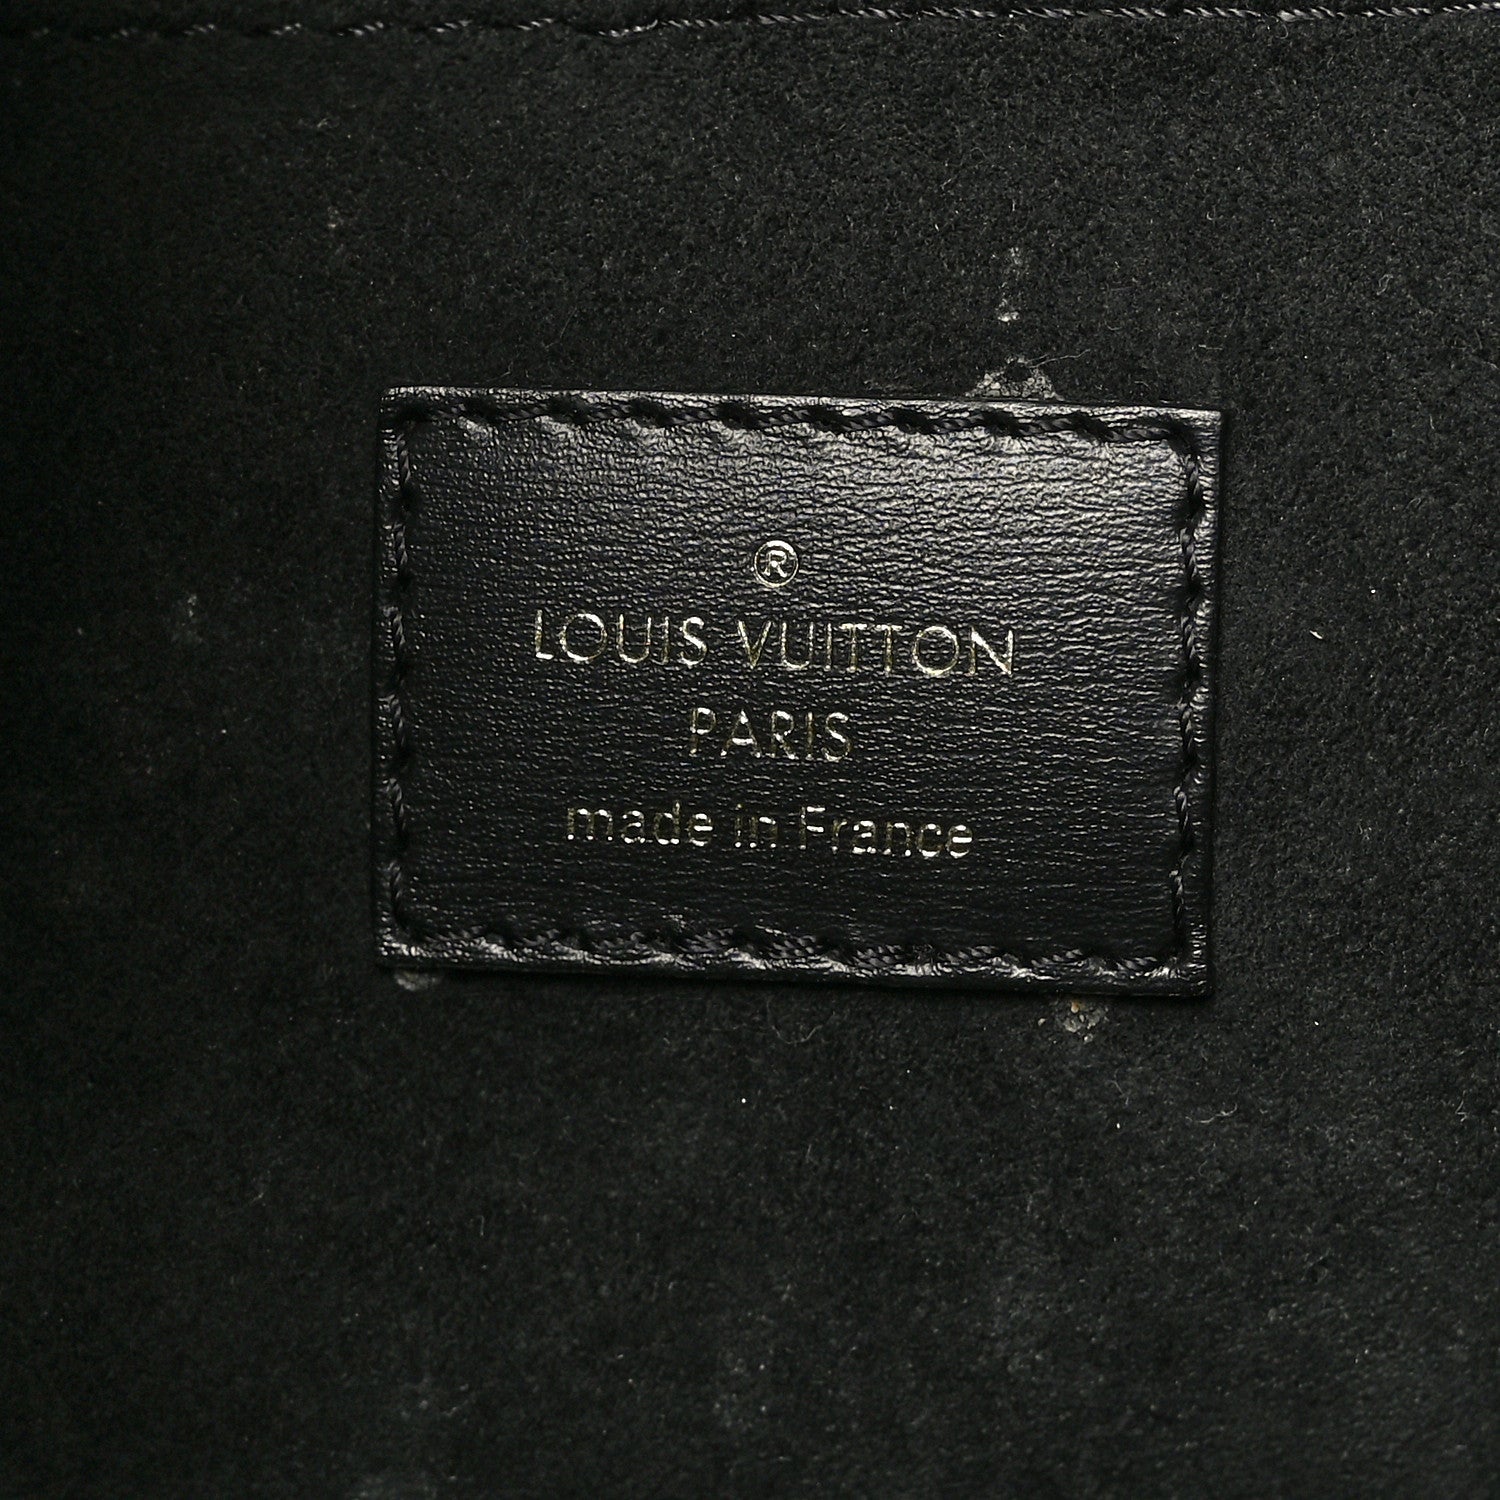 Louis Vuitton Since 1854 Onthego GM